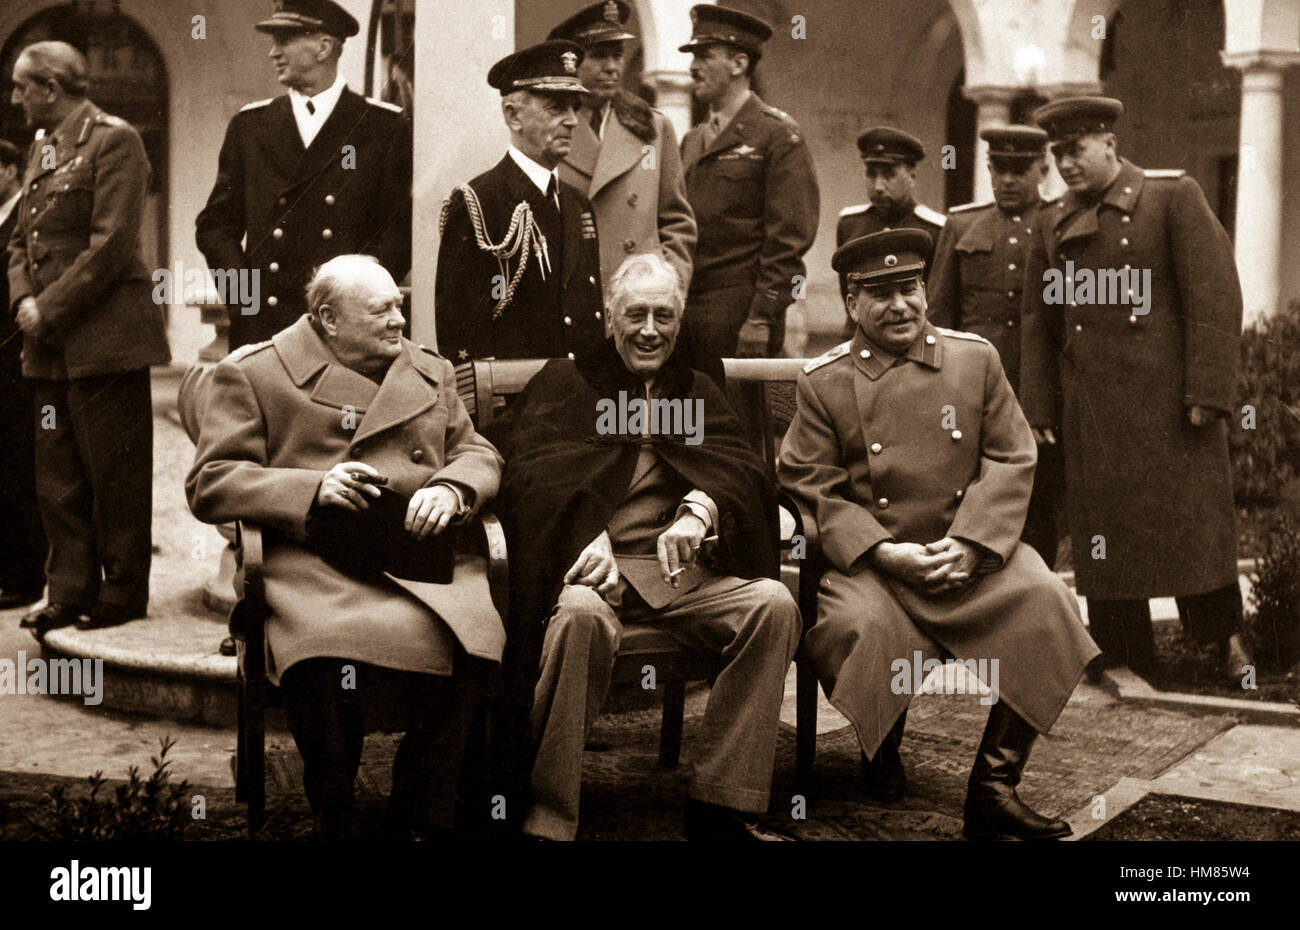 Conference of the Big Three at Yalta makes final plans for the defeat of Germany.  Here the 'Big Three' sit on the patio together, Prime Minister Winston S. Churchill, President Franklin D. Roosevelt, and Premier Josef Stalin.  February 1945. (Army) Exact Date Shot Unknown NARA FILE #:  111-SC-260486 WAR & CONFLICT BOOK #:  750 Stock Photo